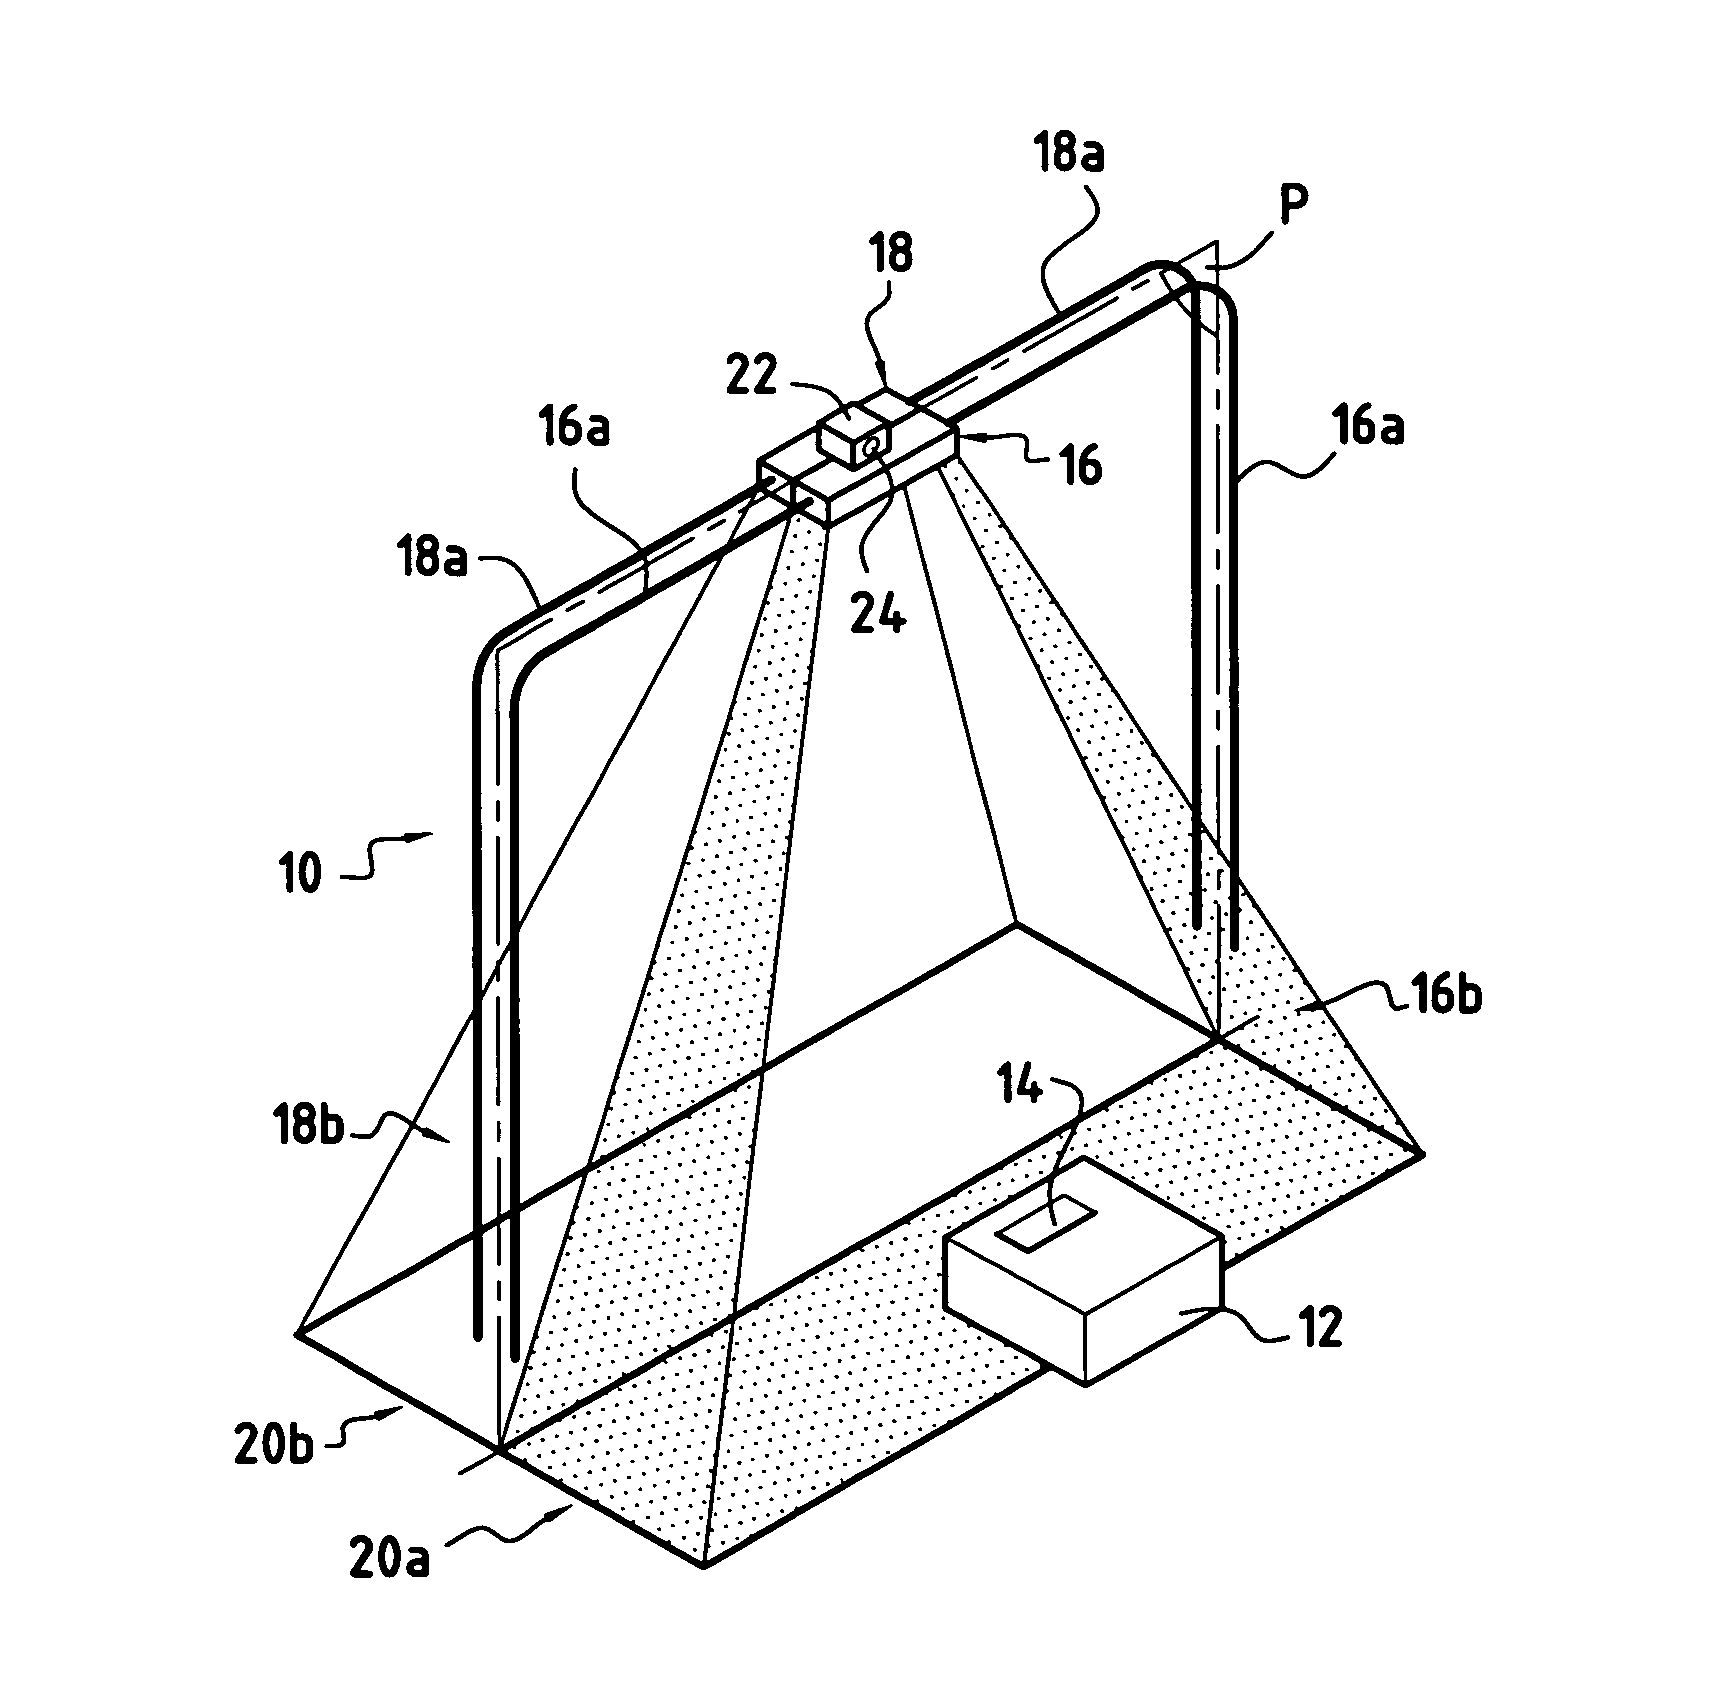 Detector system for detecting the direction in which an item passes through a determined boundary zone